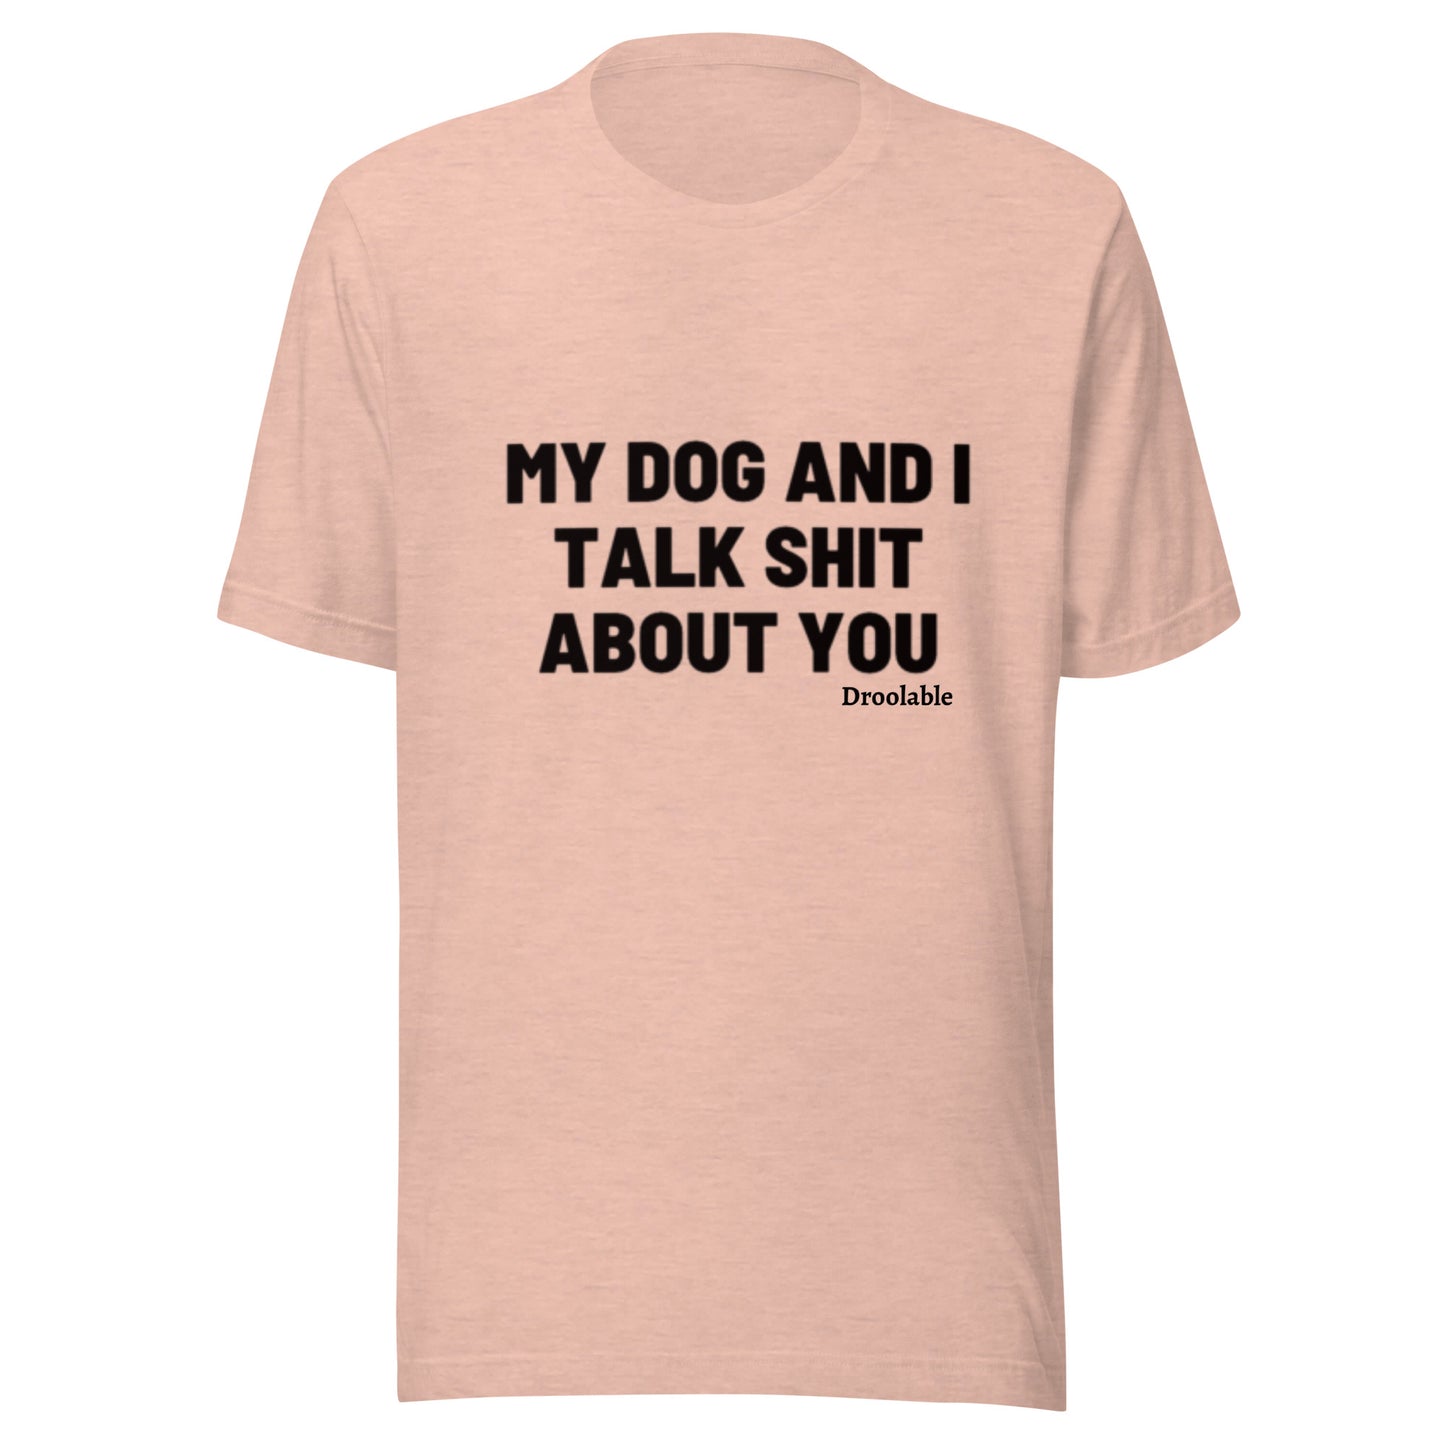 Wearables: My Dog and I Talk Shit About You T Shirt droolable